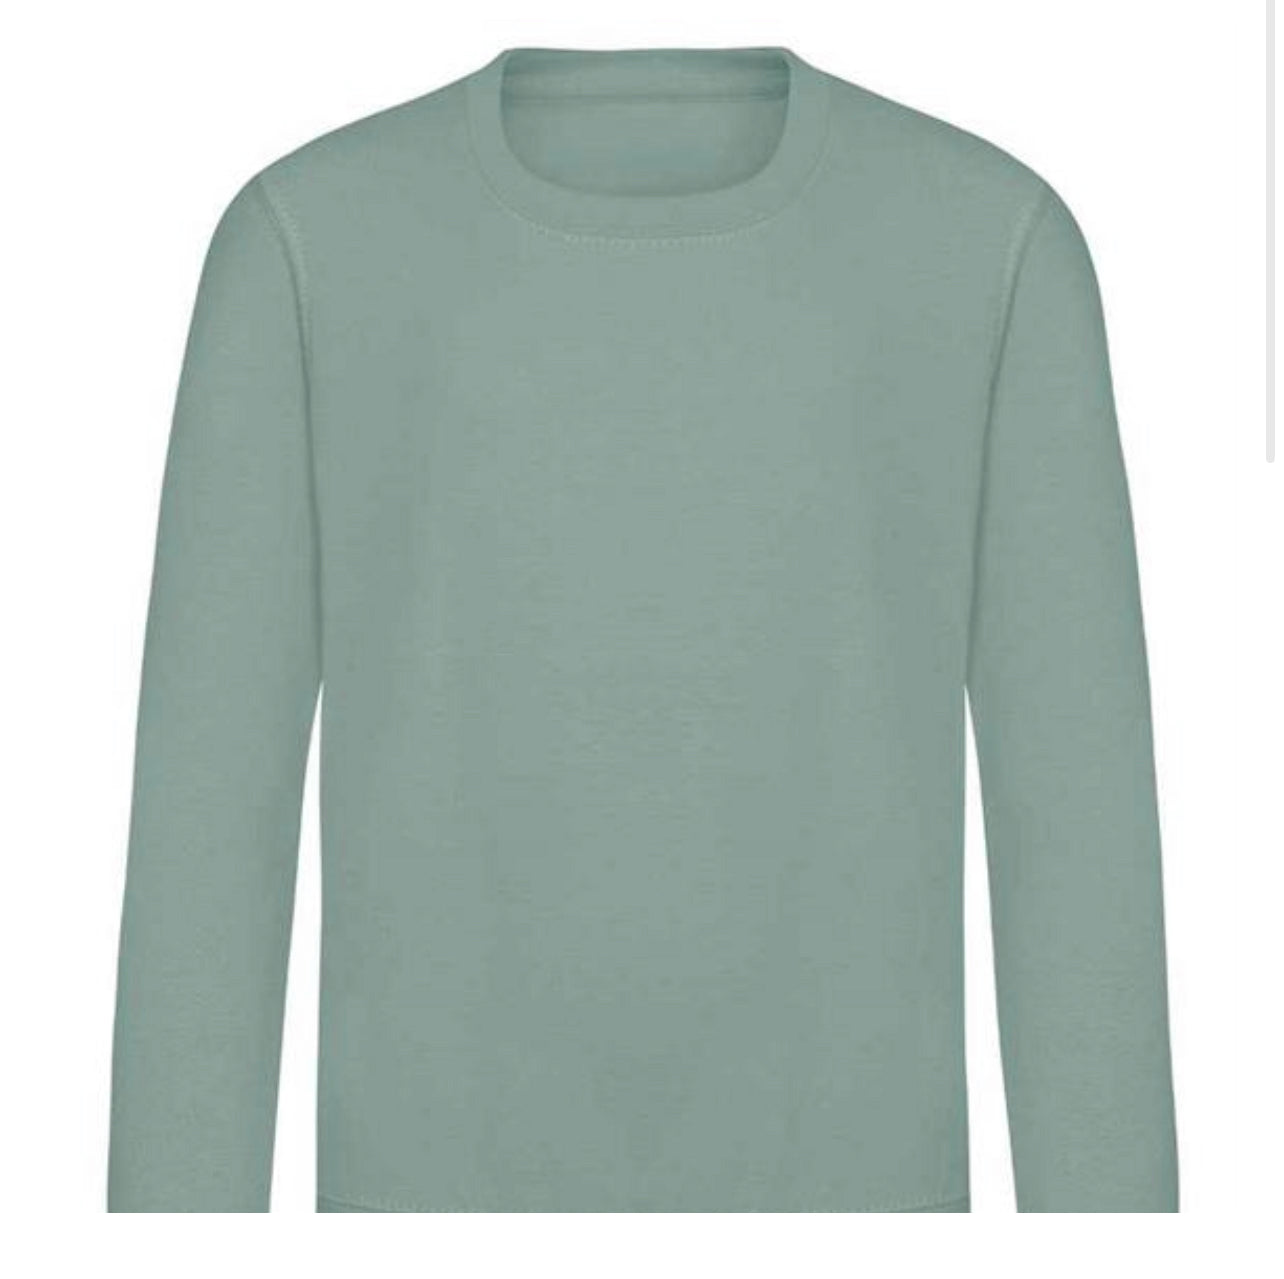 My Favourite Colour Is October Kid's Sweater